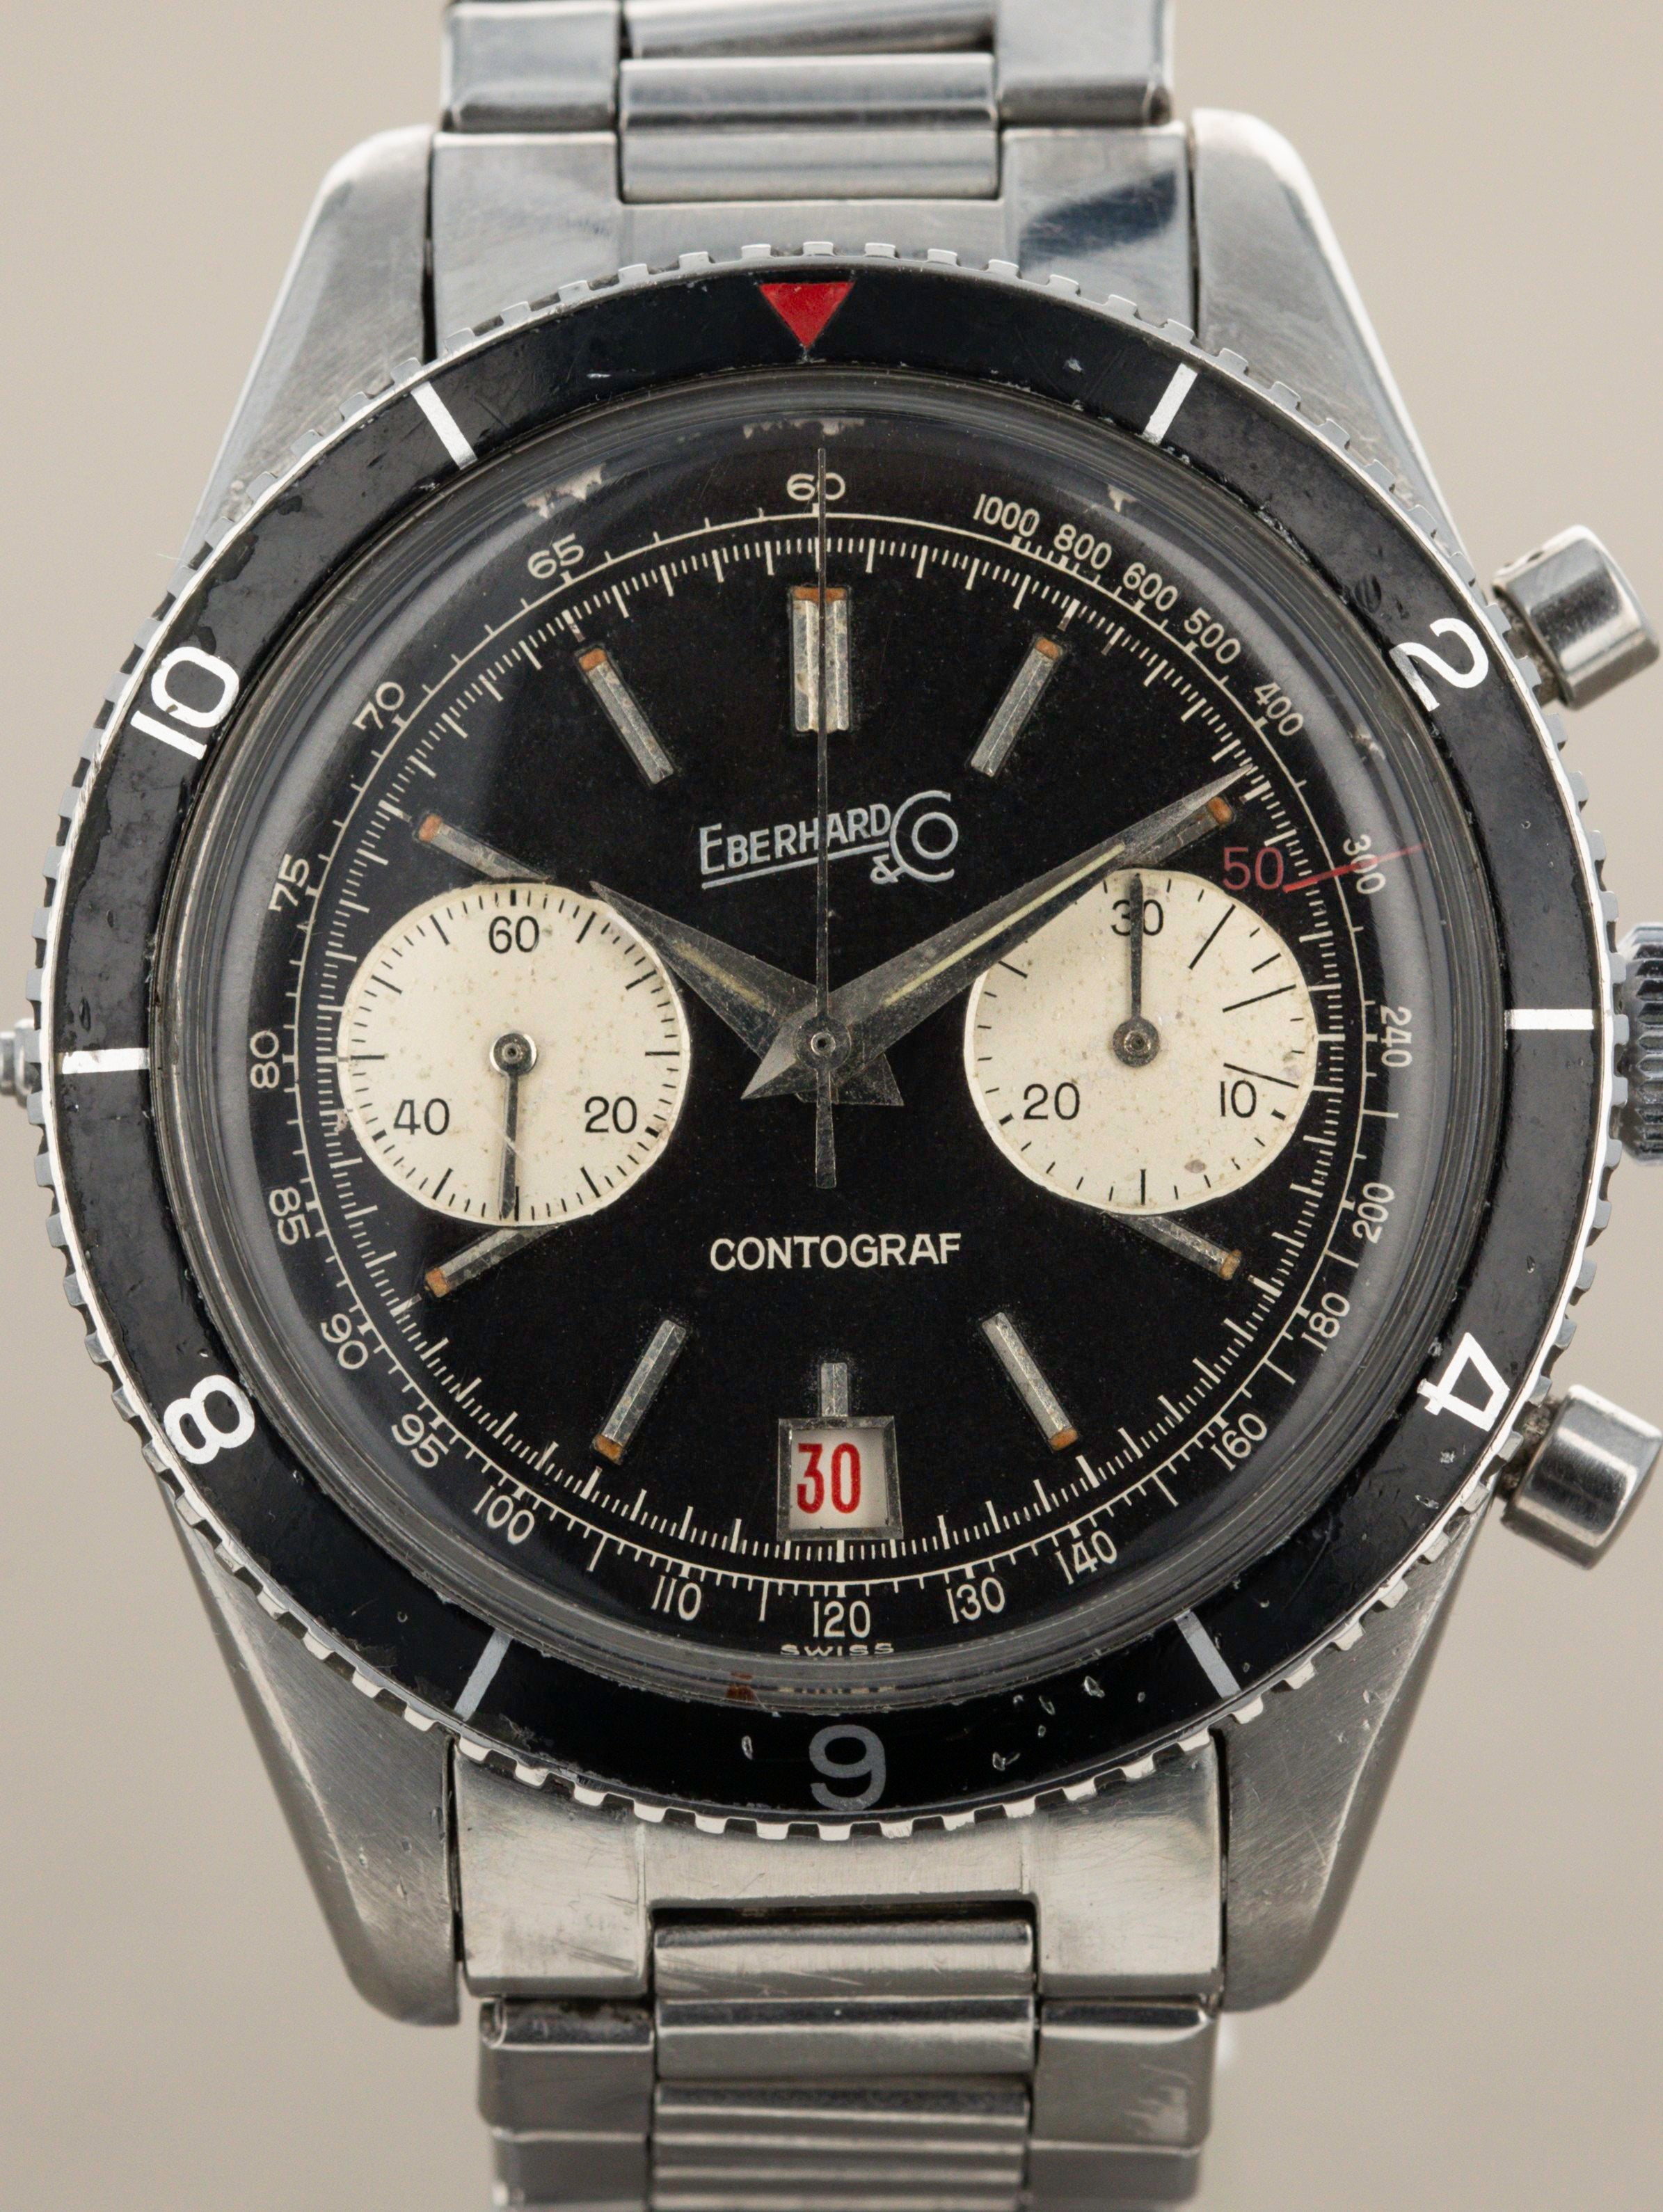 Eberhard and Co. Contograf Chronograph Ref. 14901 - Papers